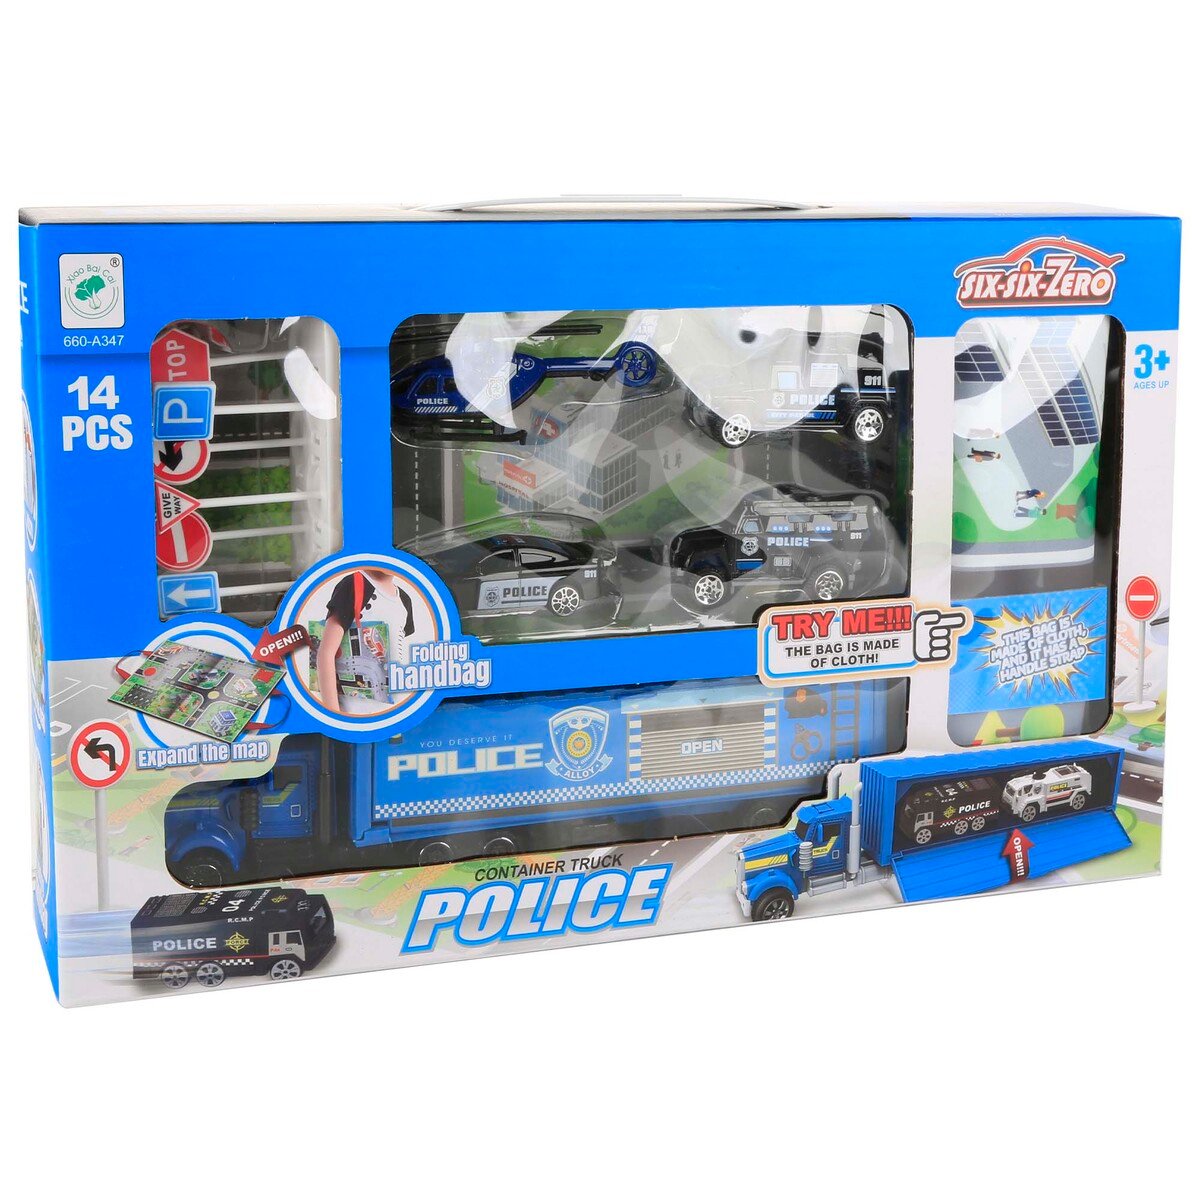 Skid Fusion Truck WithMap Play Set 660-A347